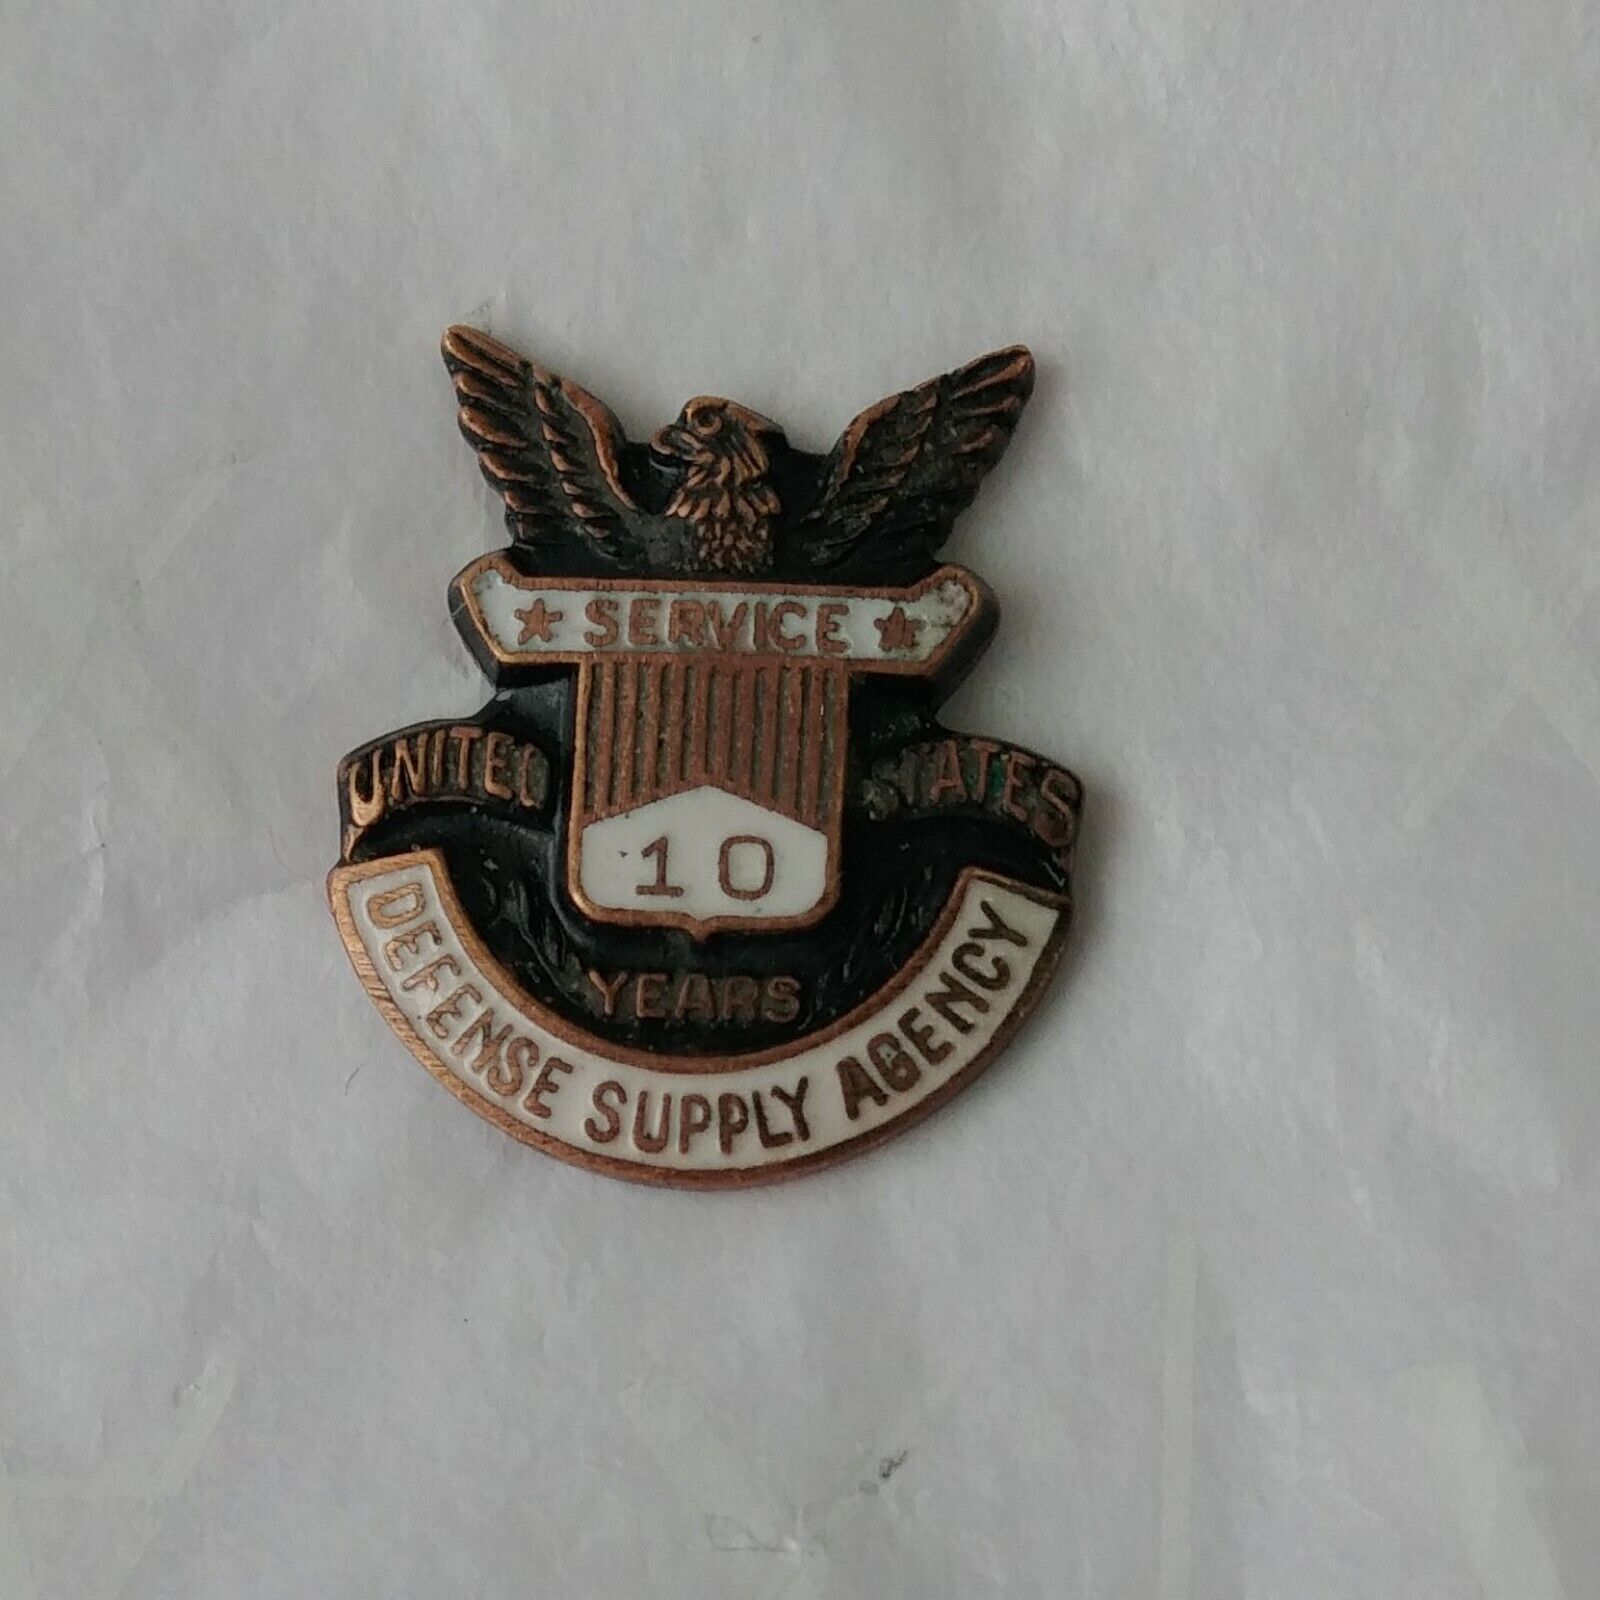 Defense Supply Agency 10 Year Service Pin Made by His Lordship NYC